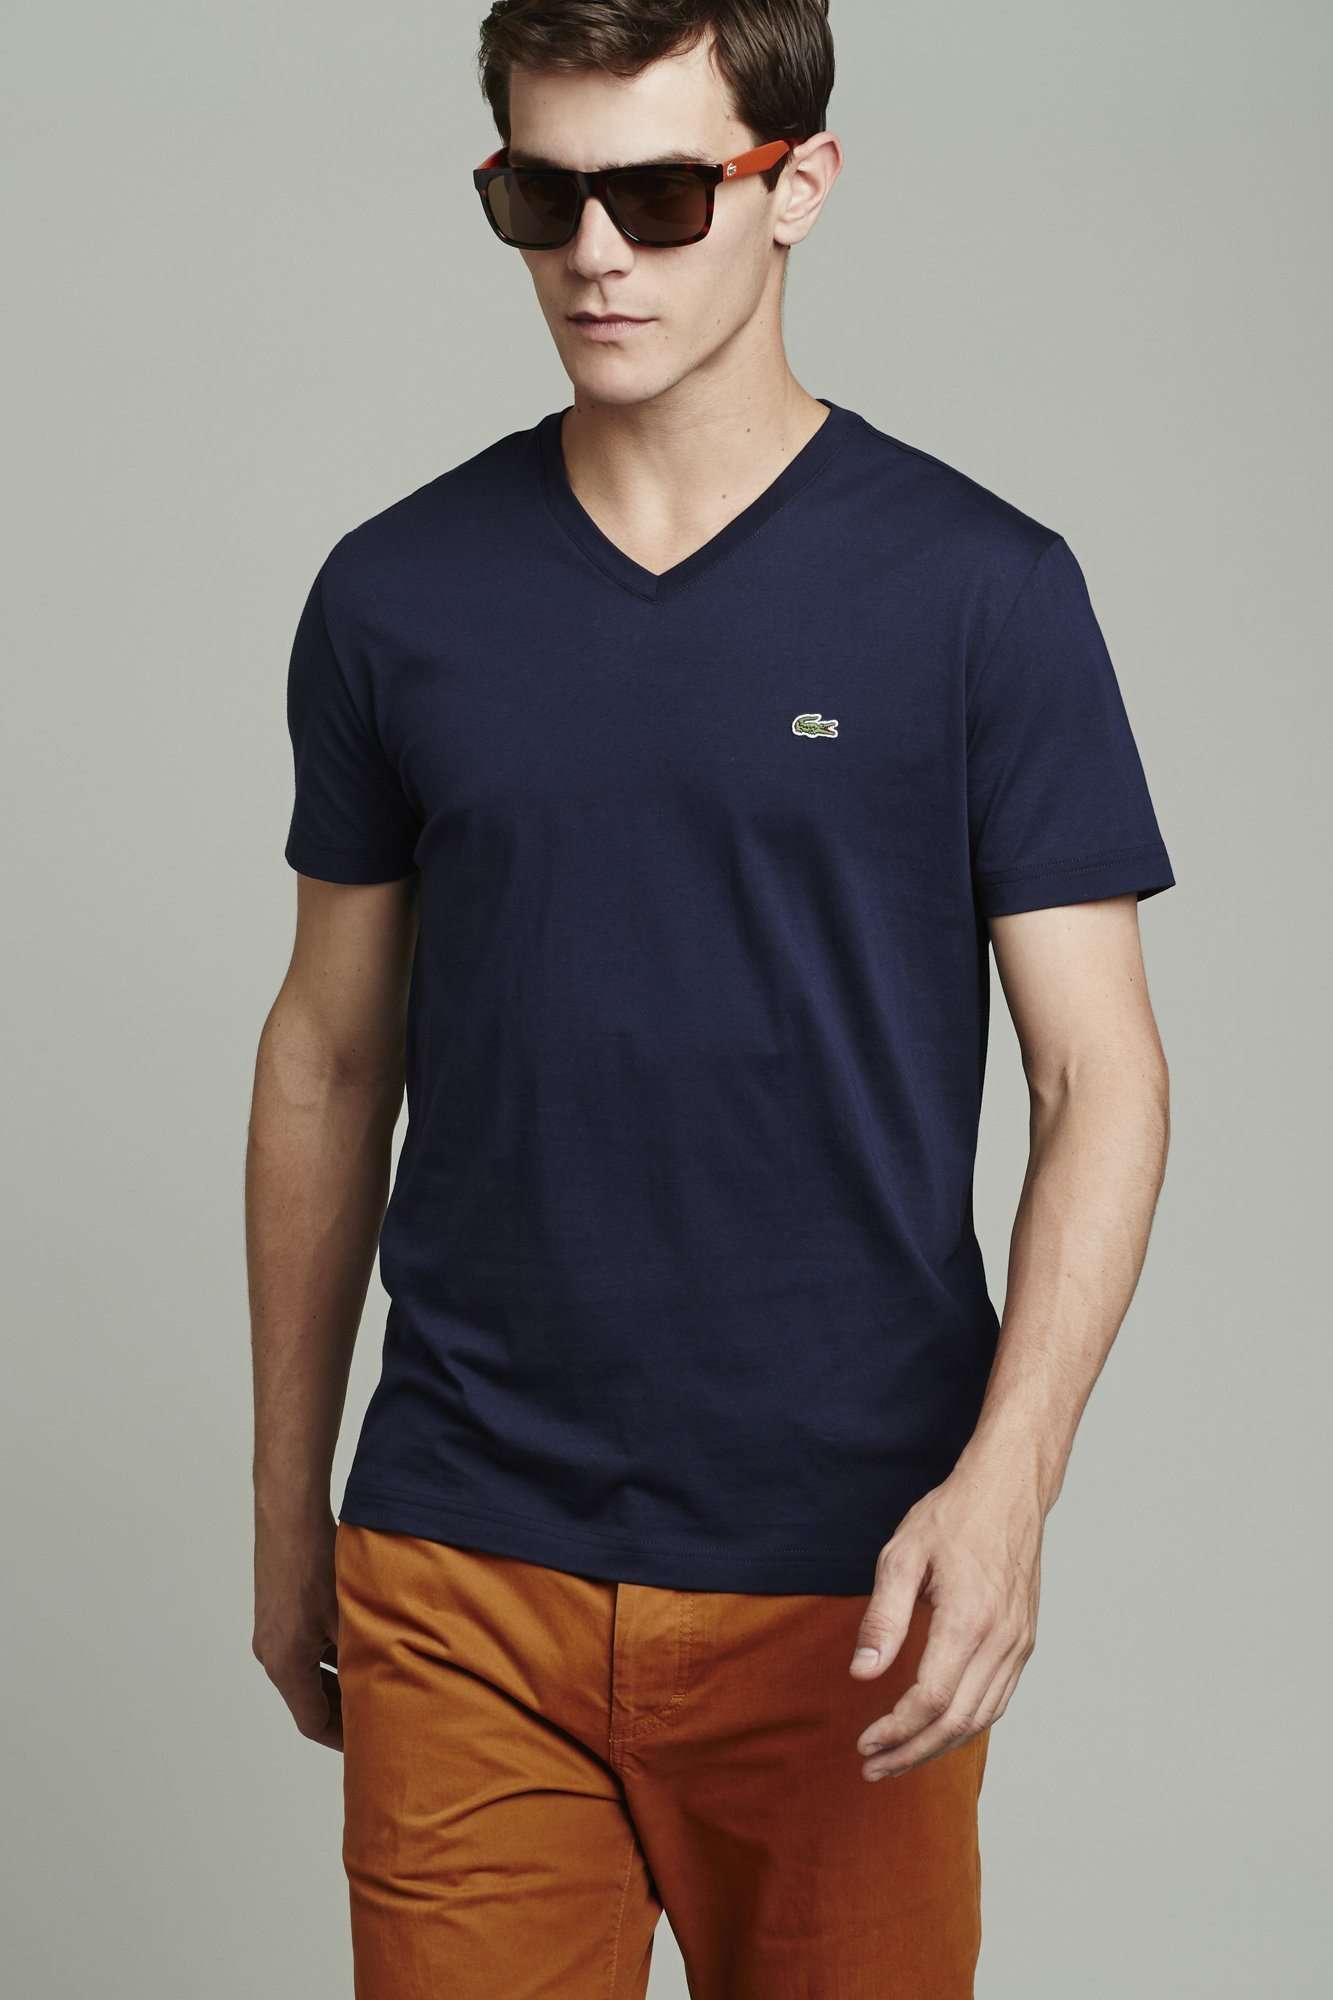 Lacoste Short Sleeve Pima Jersey V-neck T-shirt in Navy – Country